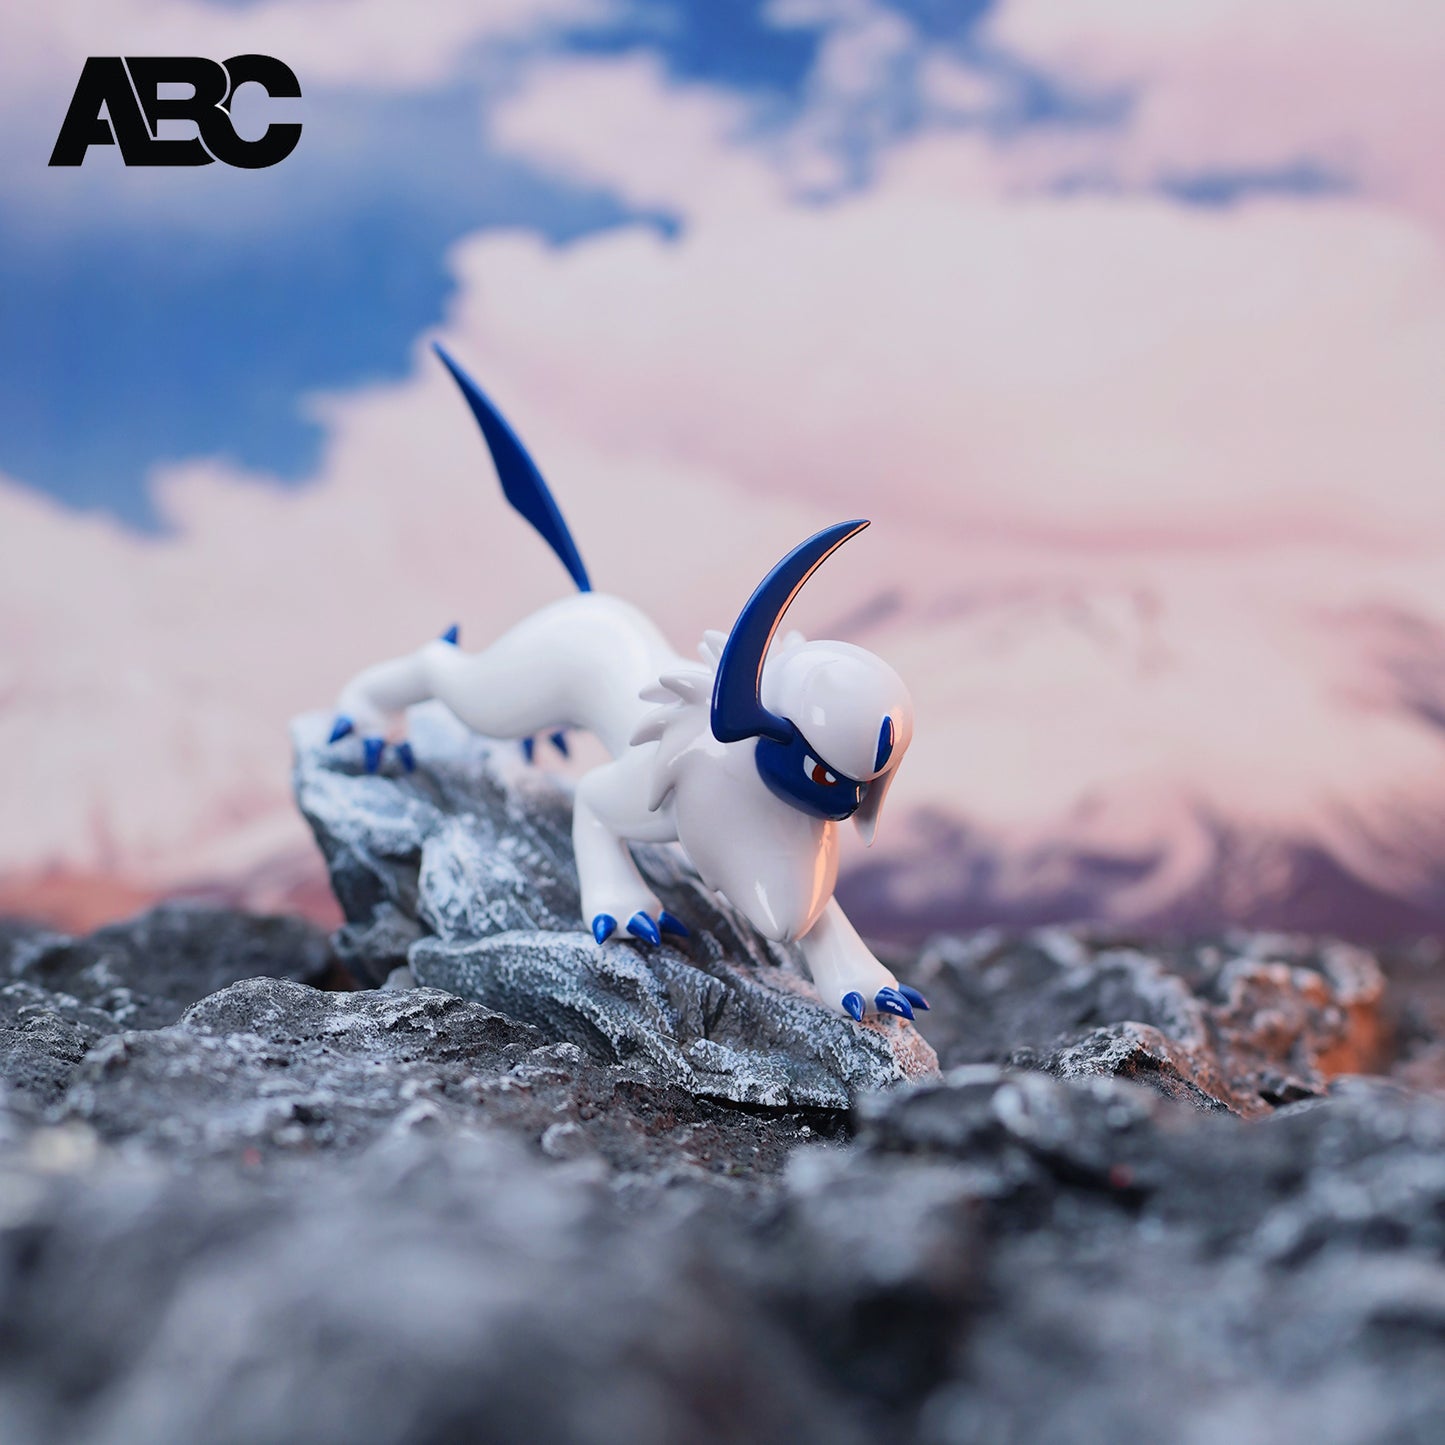 [PREORDER] 1/20 Scale World Figure [ABC] - Absol + Mega Absol